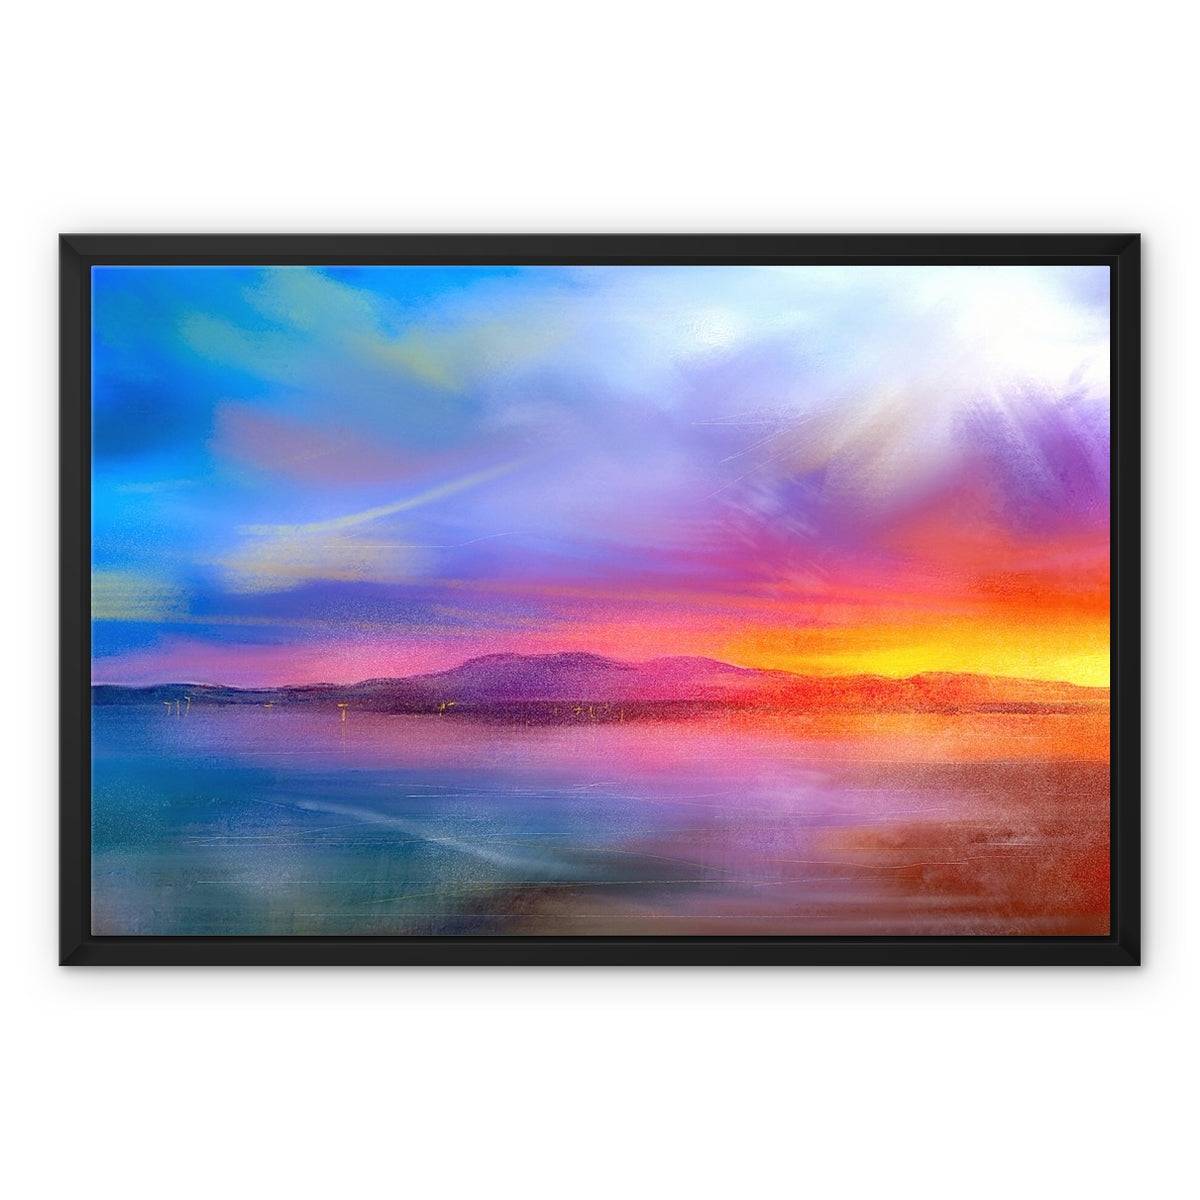 Arran Sunset Painting | Framed Canvas From Scotland-Floating Framed Canvas Prints-Arran Art Gallery-24"x18"-Black Frame-Paintings, Prints, Homeware, Art Gifts From Scotland By Scottish Artist Kevin Hunter